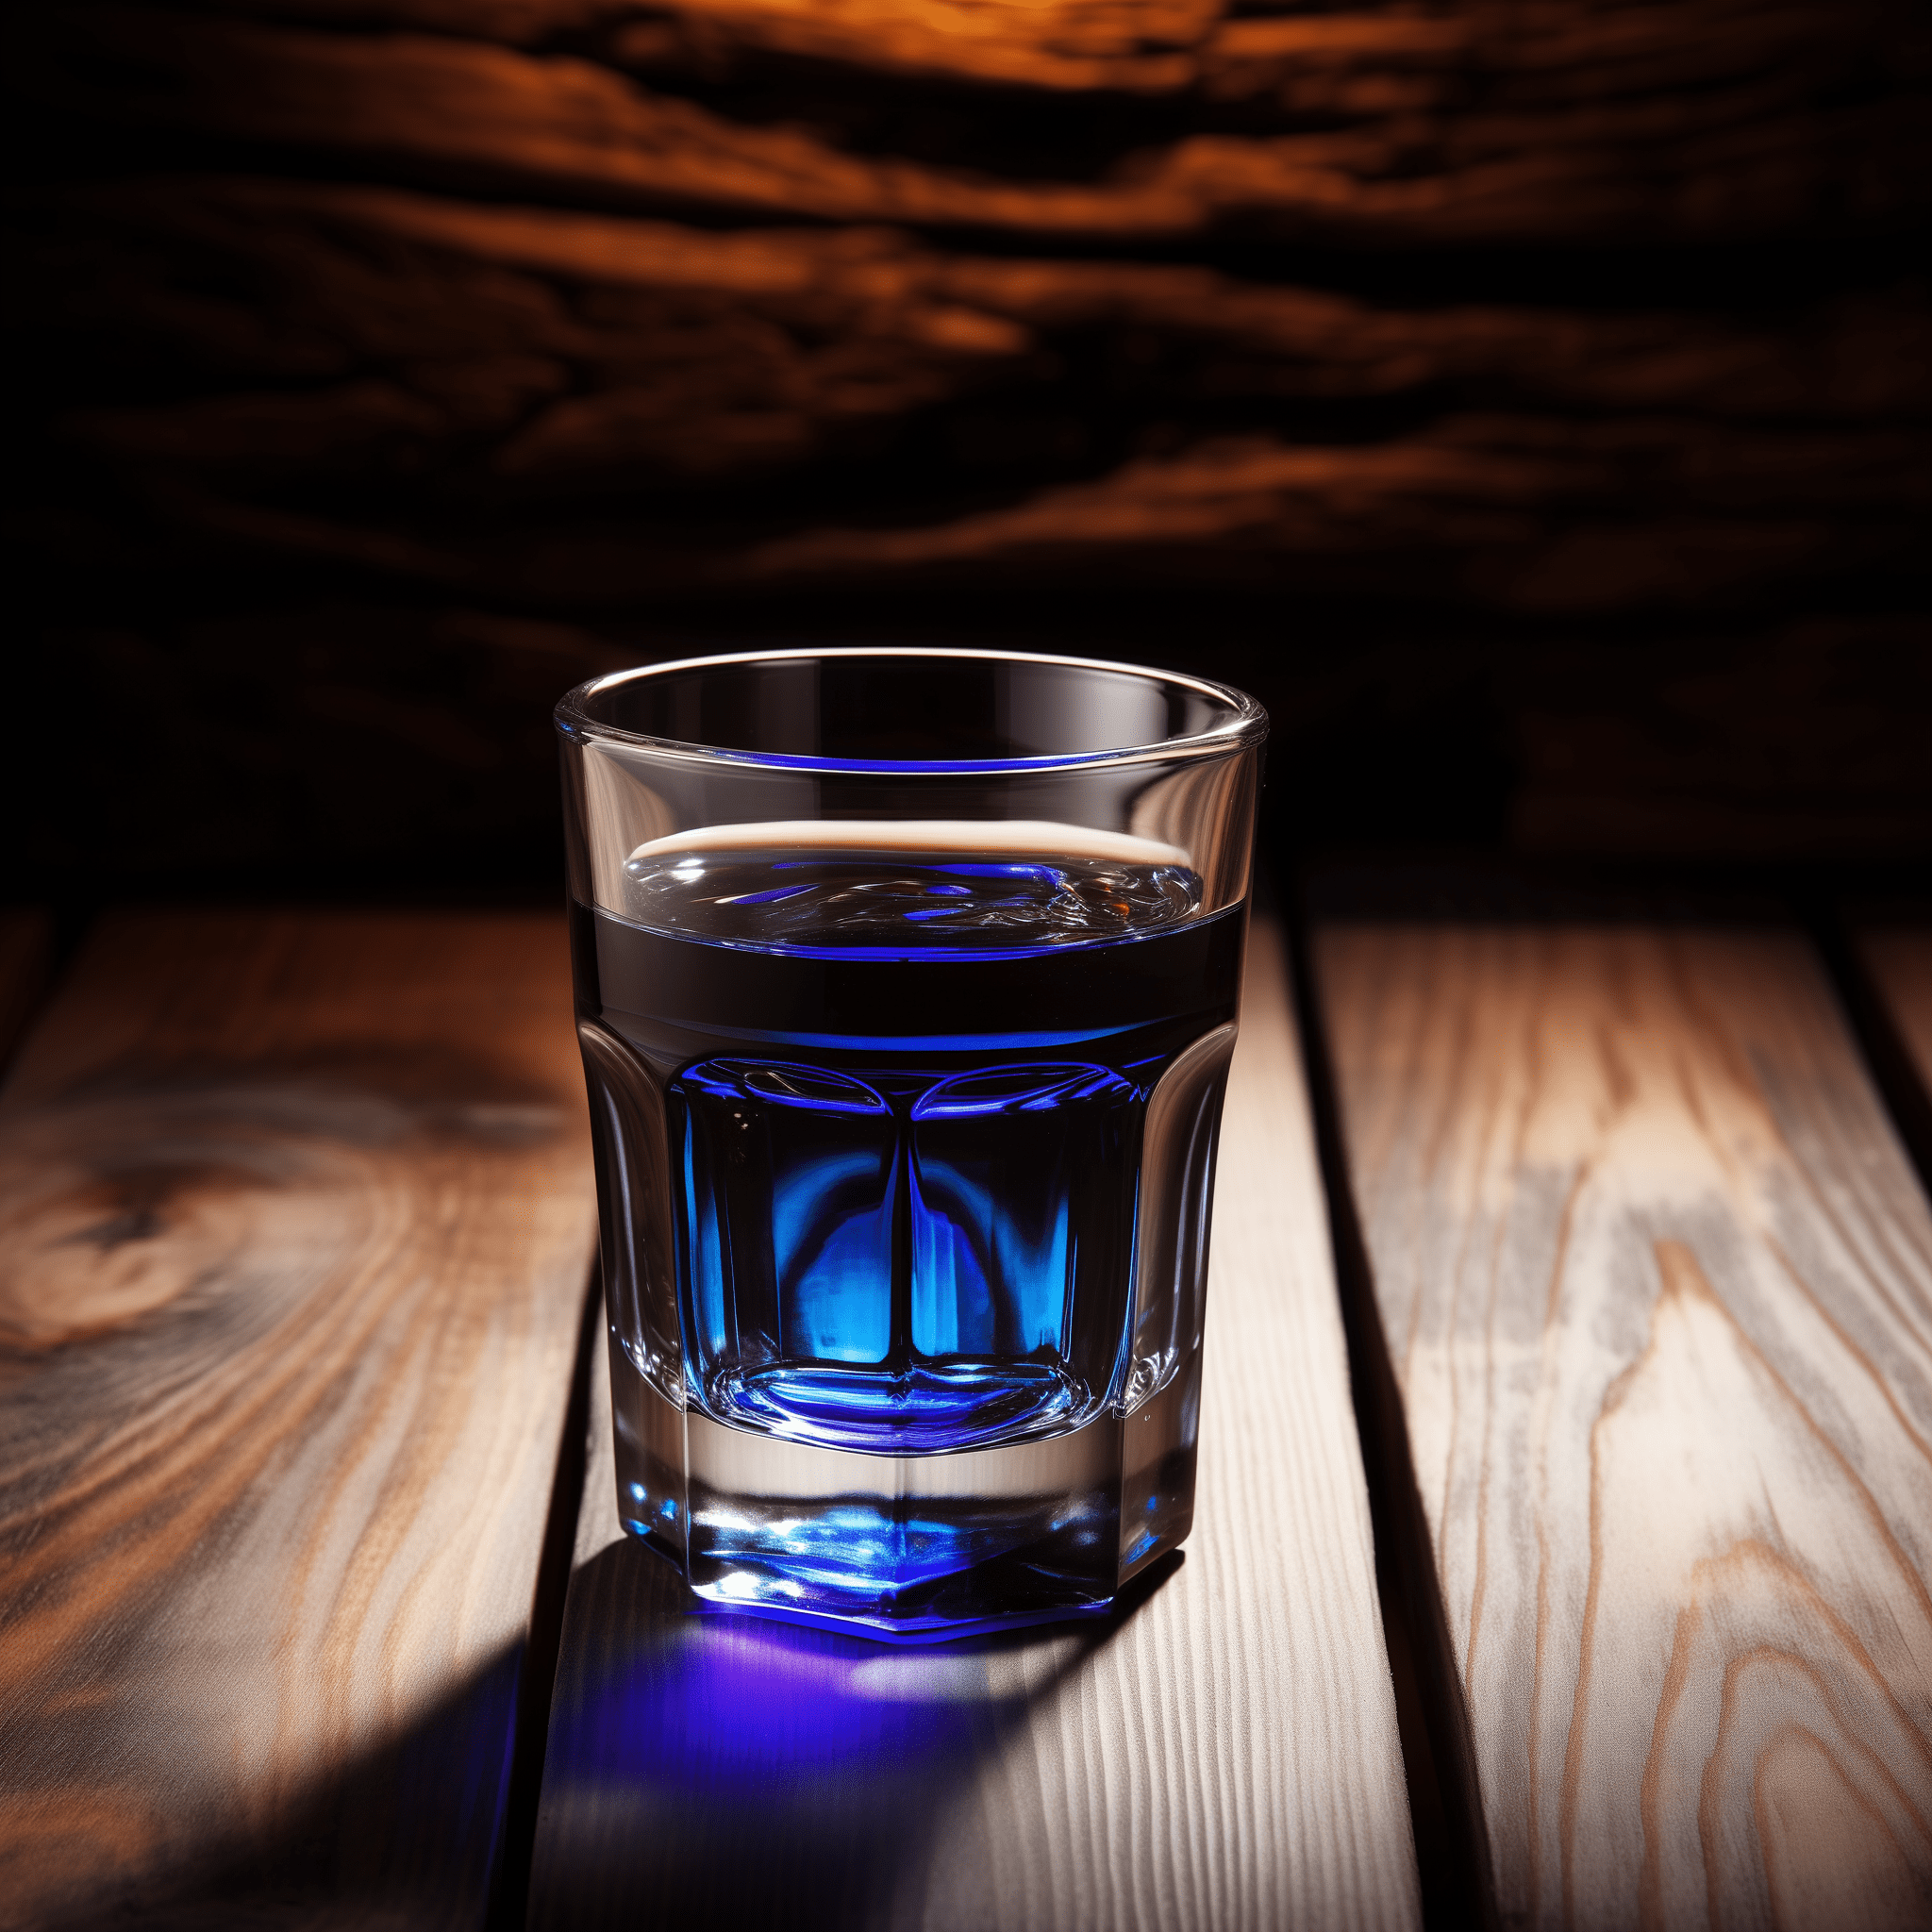 Black and Blue Shot Recipe - The Black and Blue Shot is a bold combination of sweet and sour with a strong alcoholic kick. The berry notes from the blackberry liqueur provide a fruity sweetness that's immediately followed by the sharpness of the Jägermeister. It's a shot that's not for the faint of heart.